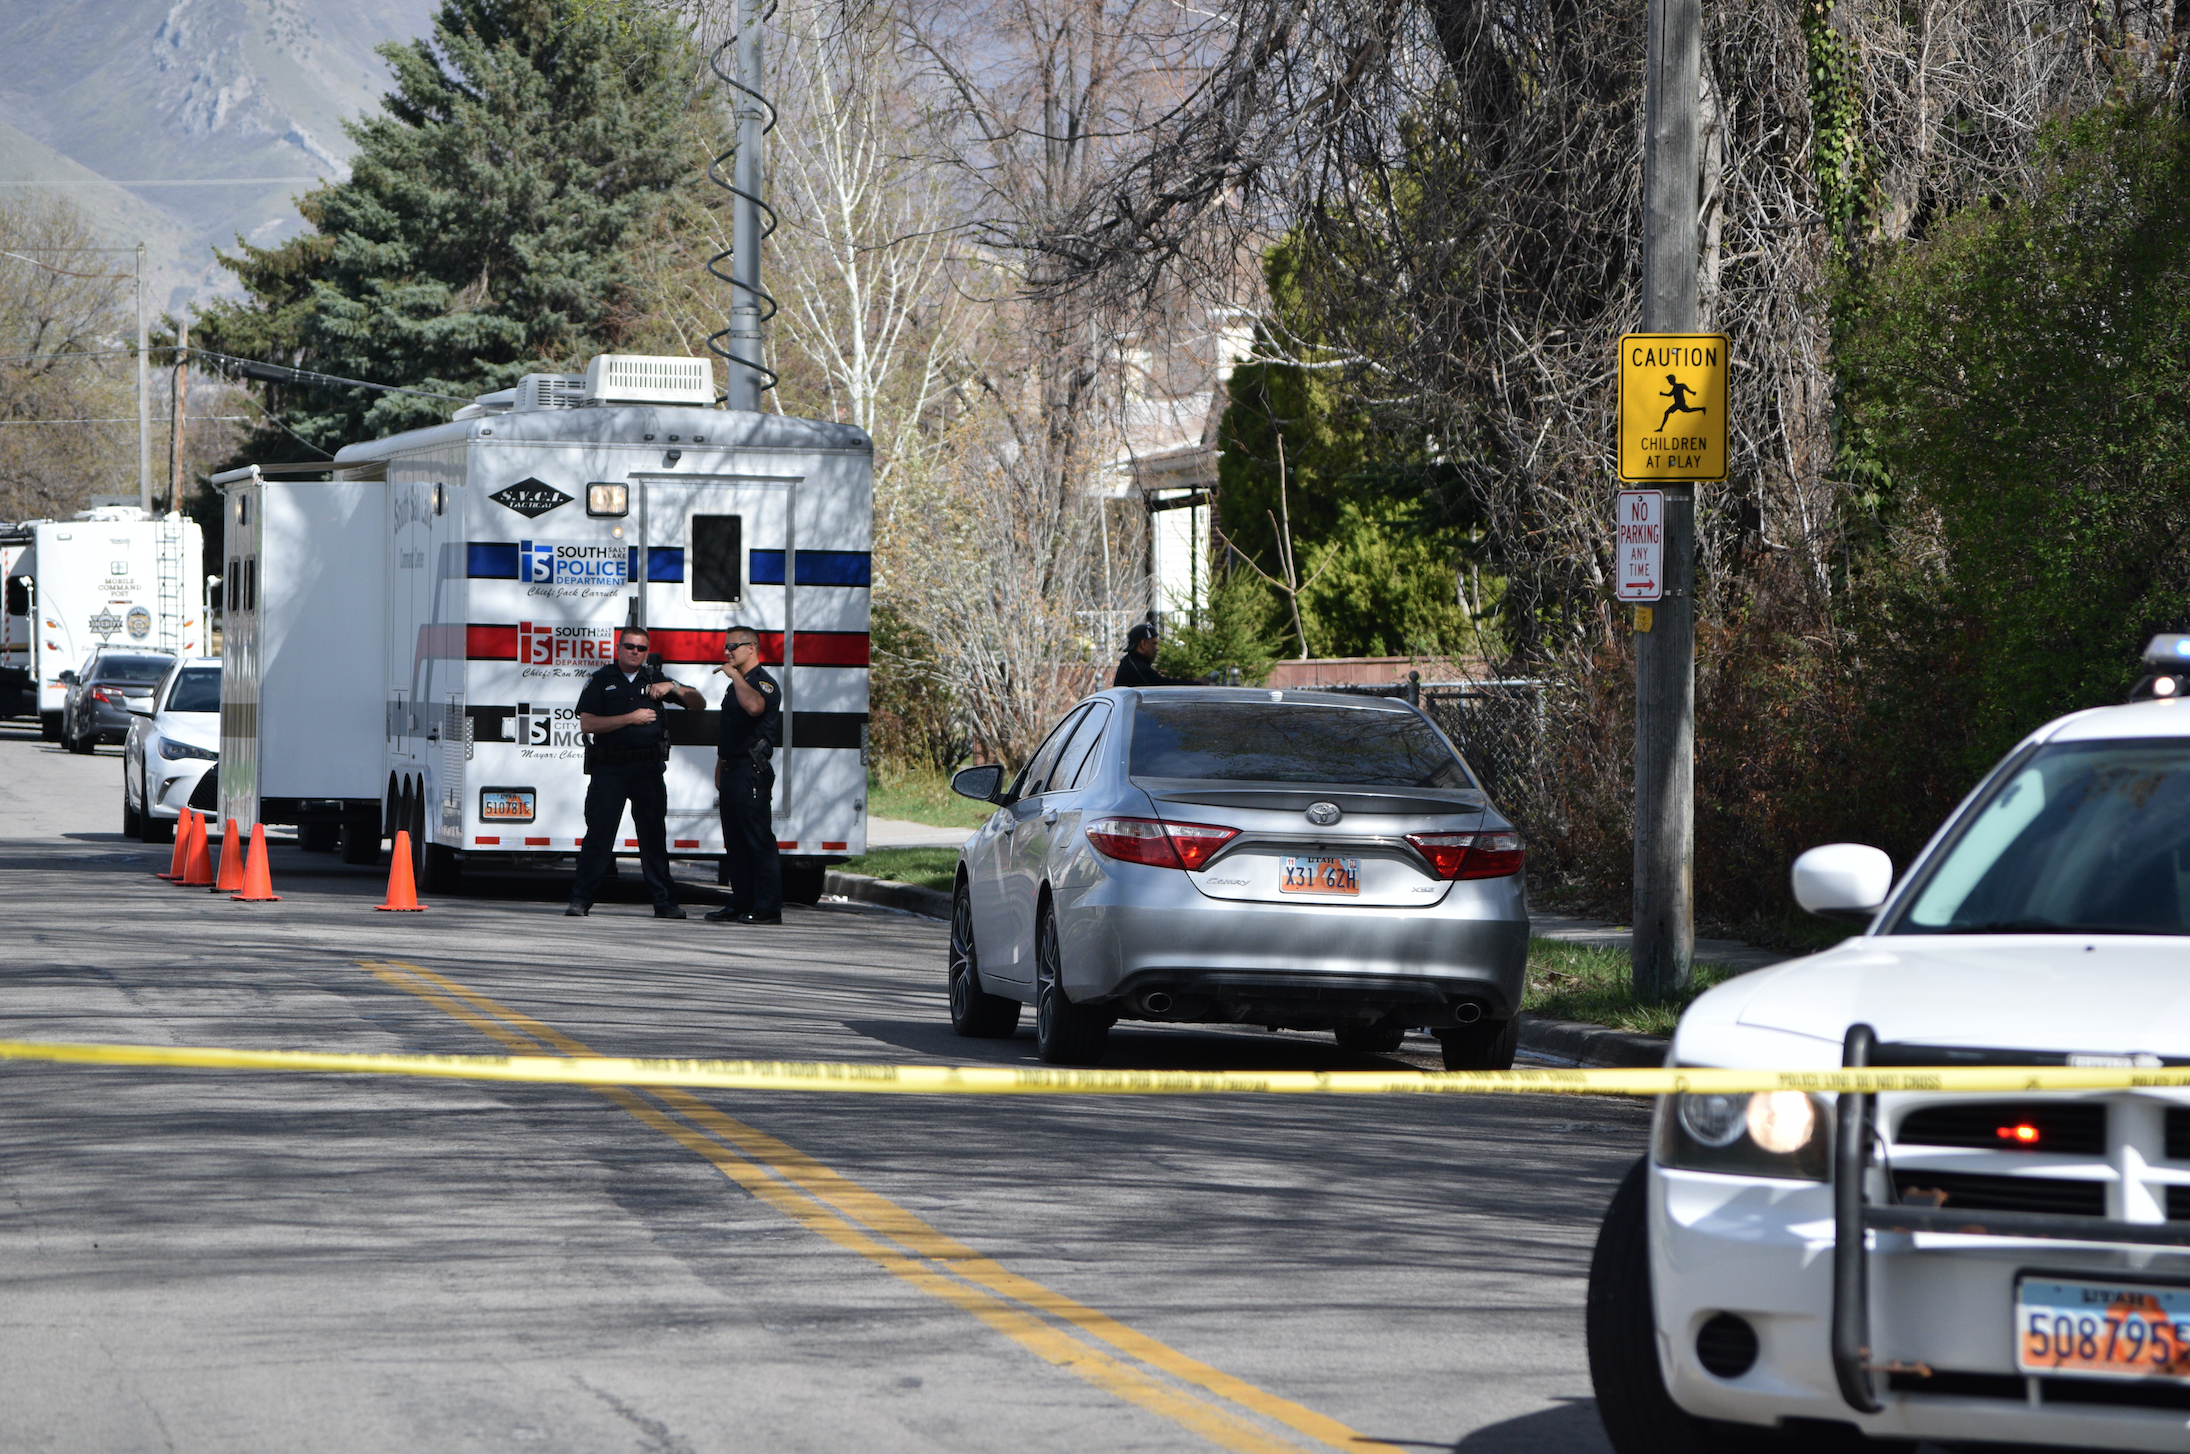 Police on the scene of a SWAT standoff at 2950 S. 300 East in South Salt Lake, April 8, 2016. Photo: Gephardt Daily